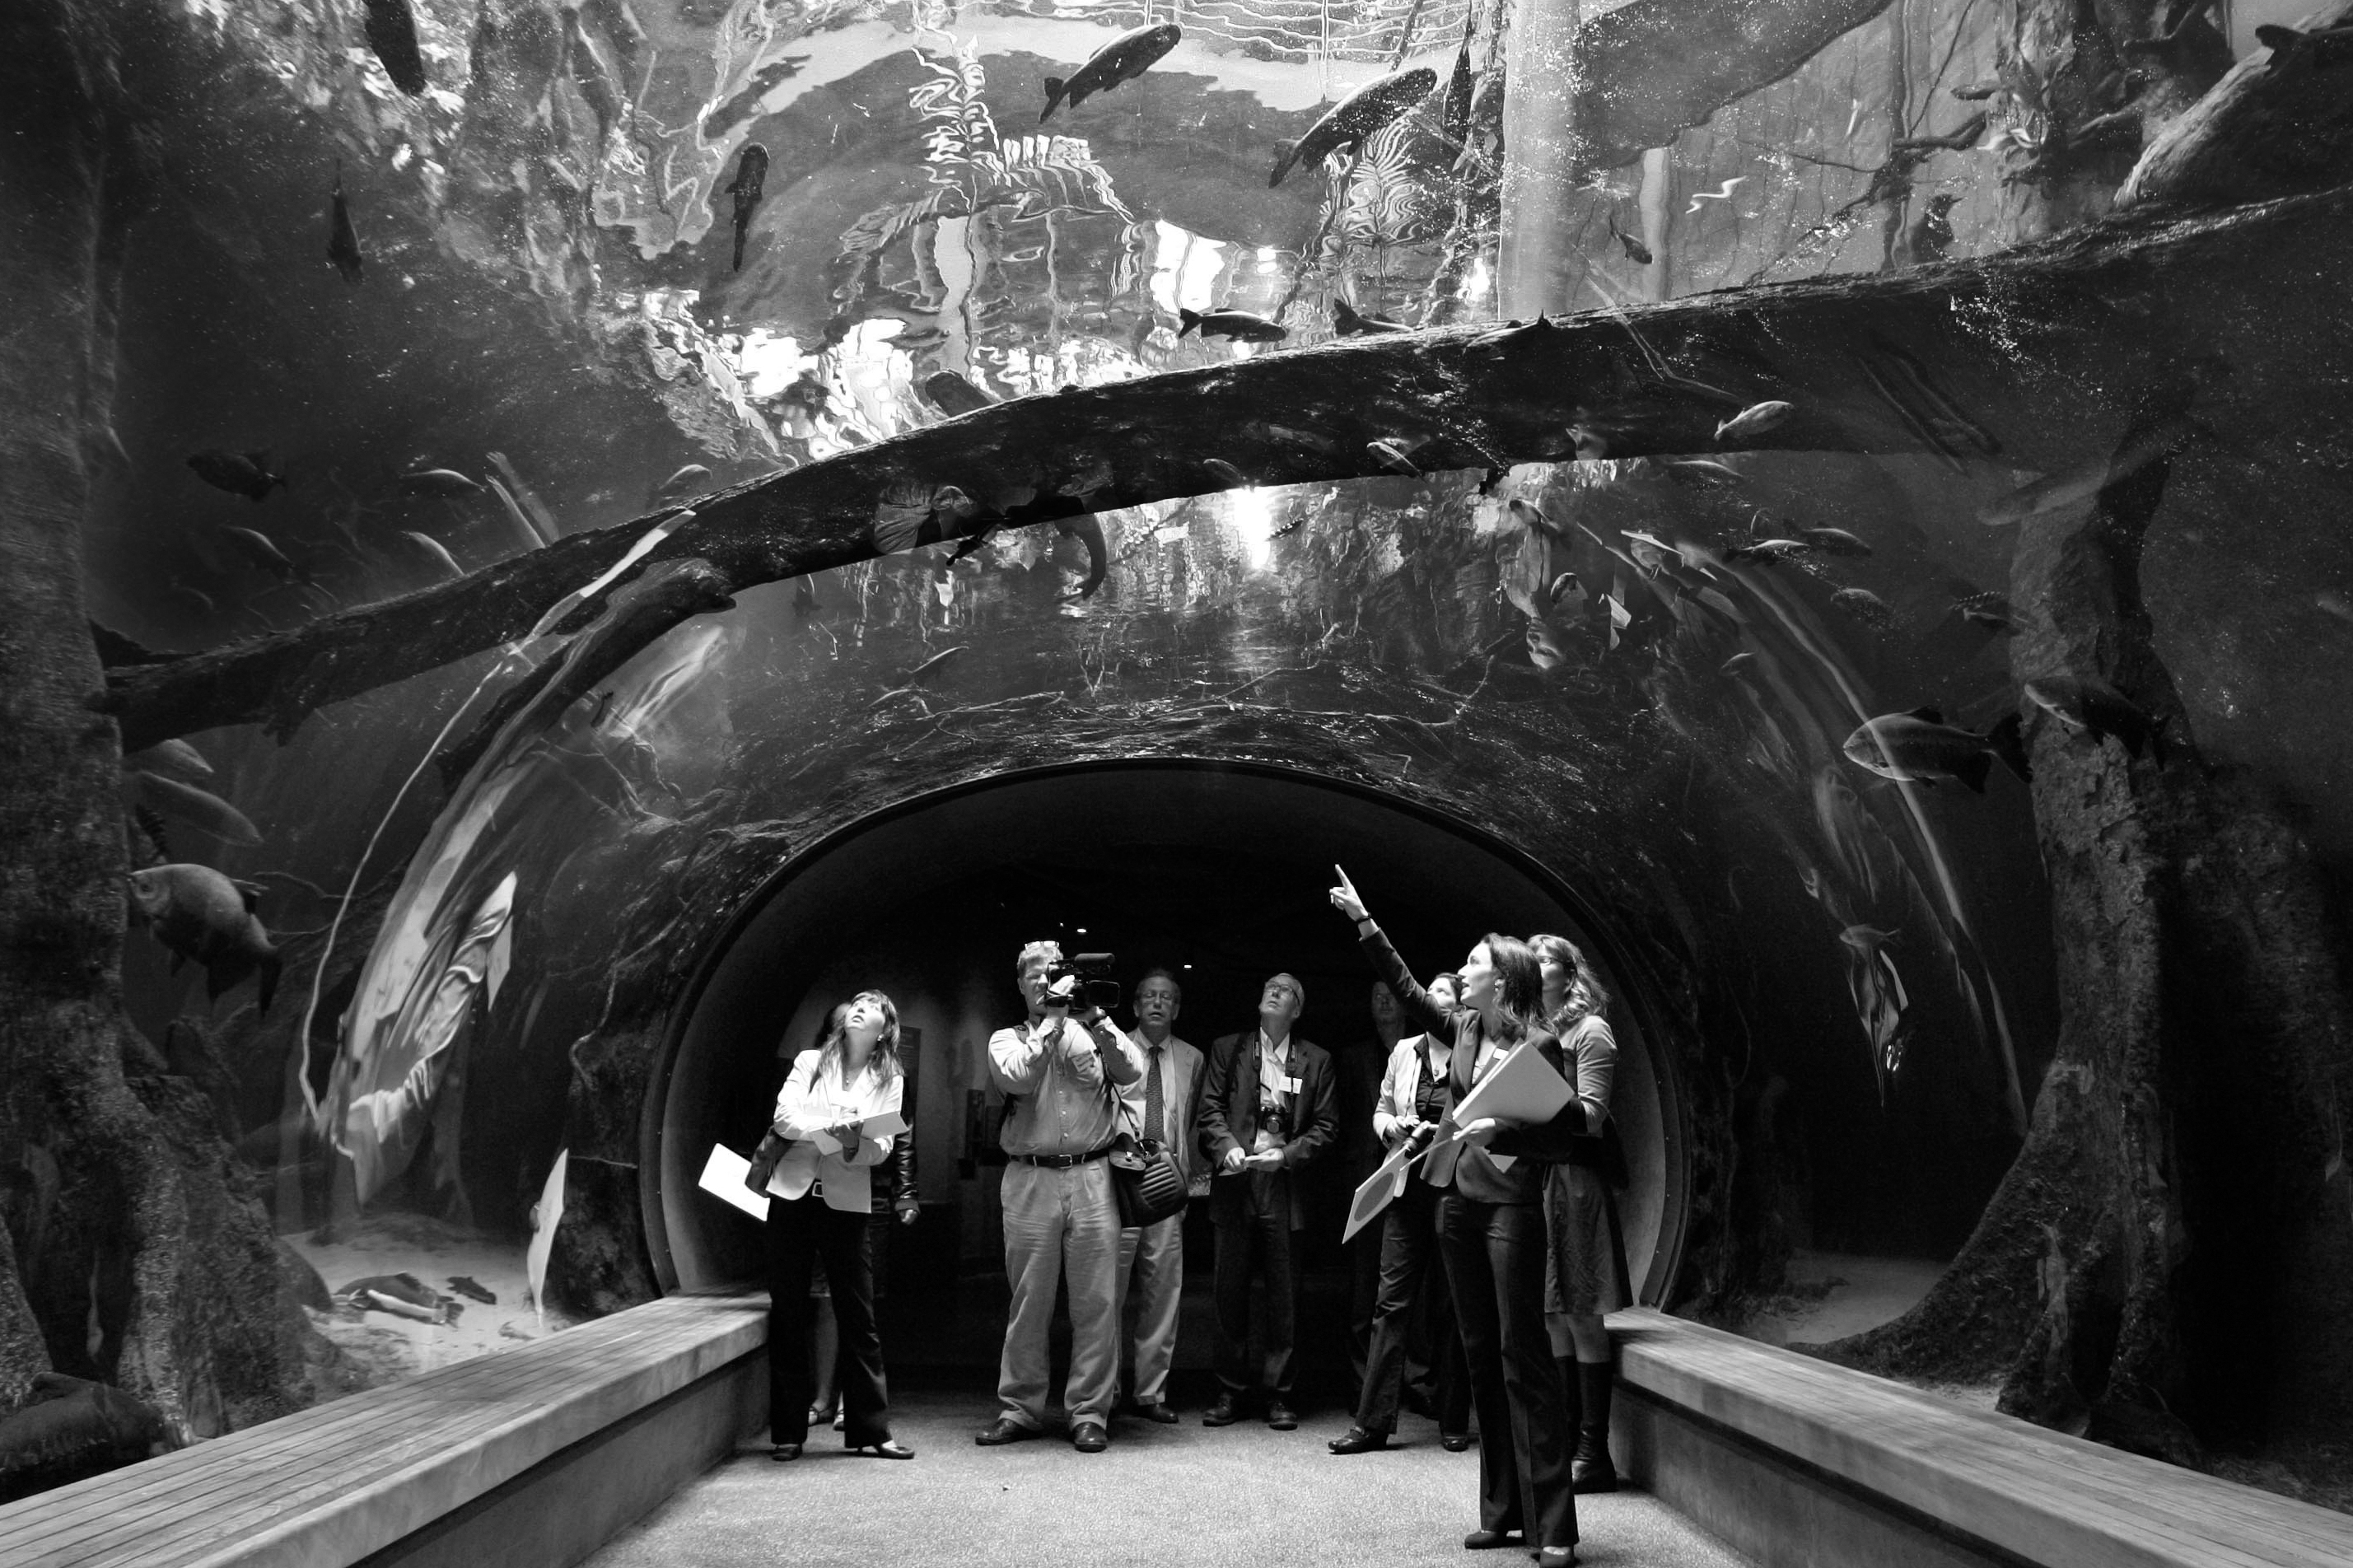 A group of people stands inside an underwater tunnel at an aquarium, looking up at various fish swimming overhead and one person pointing upwards.